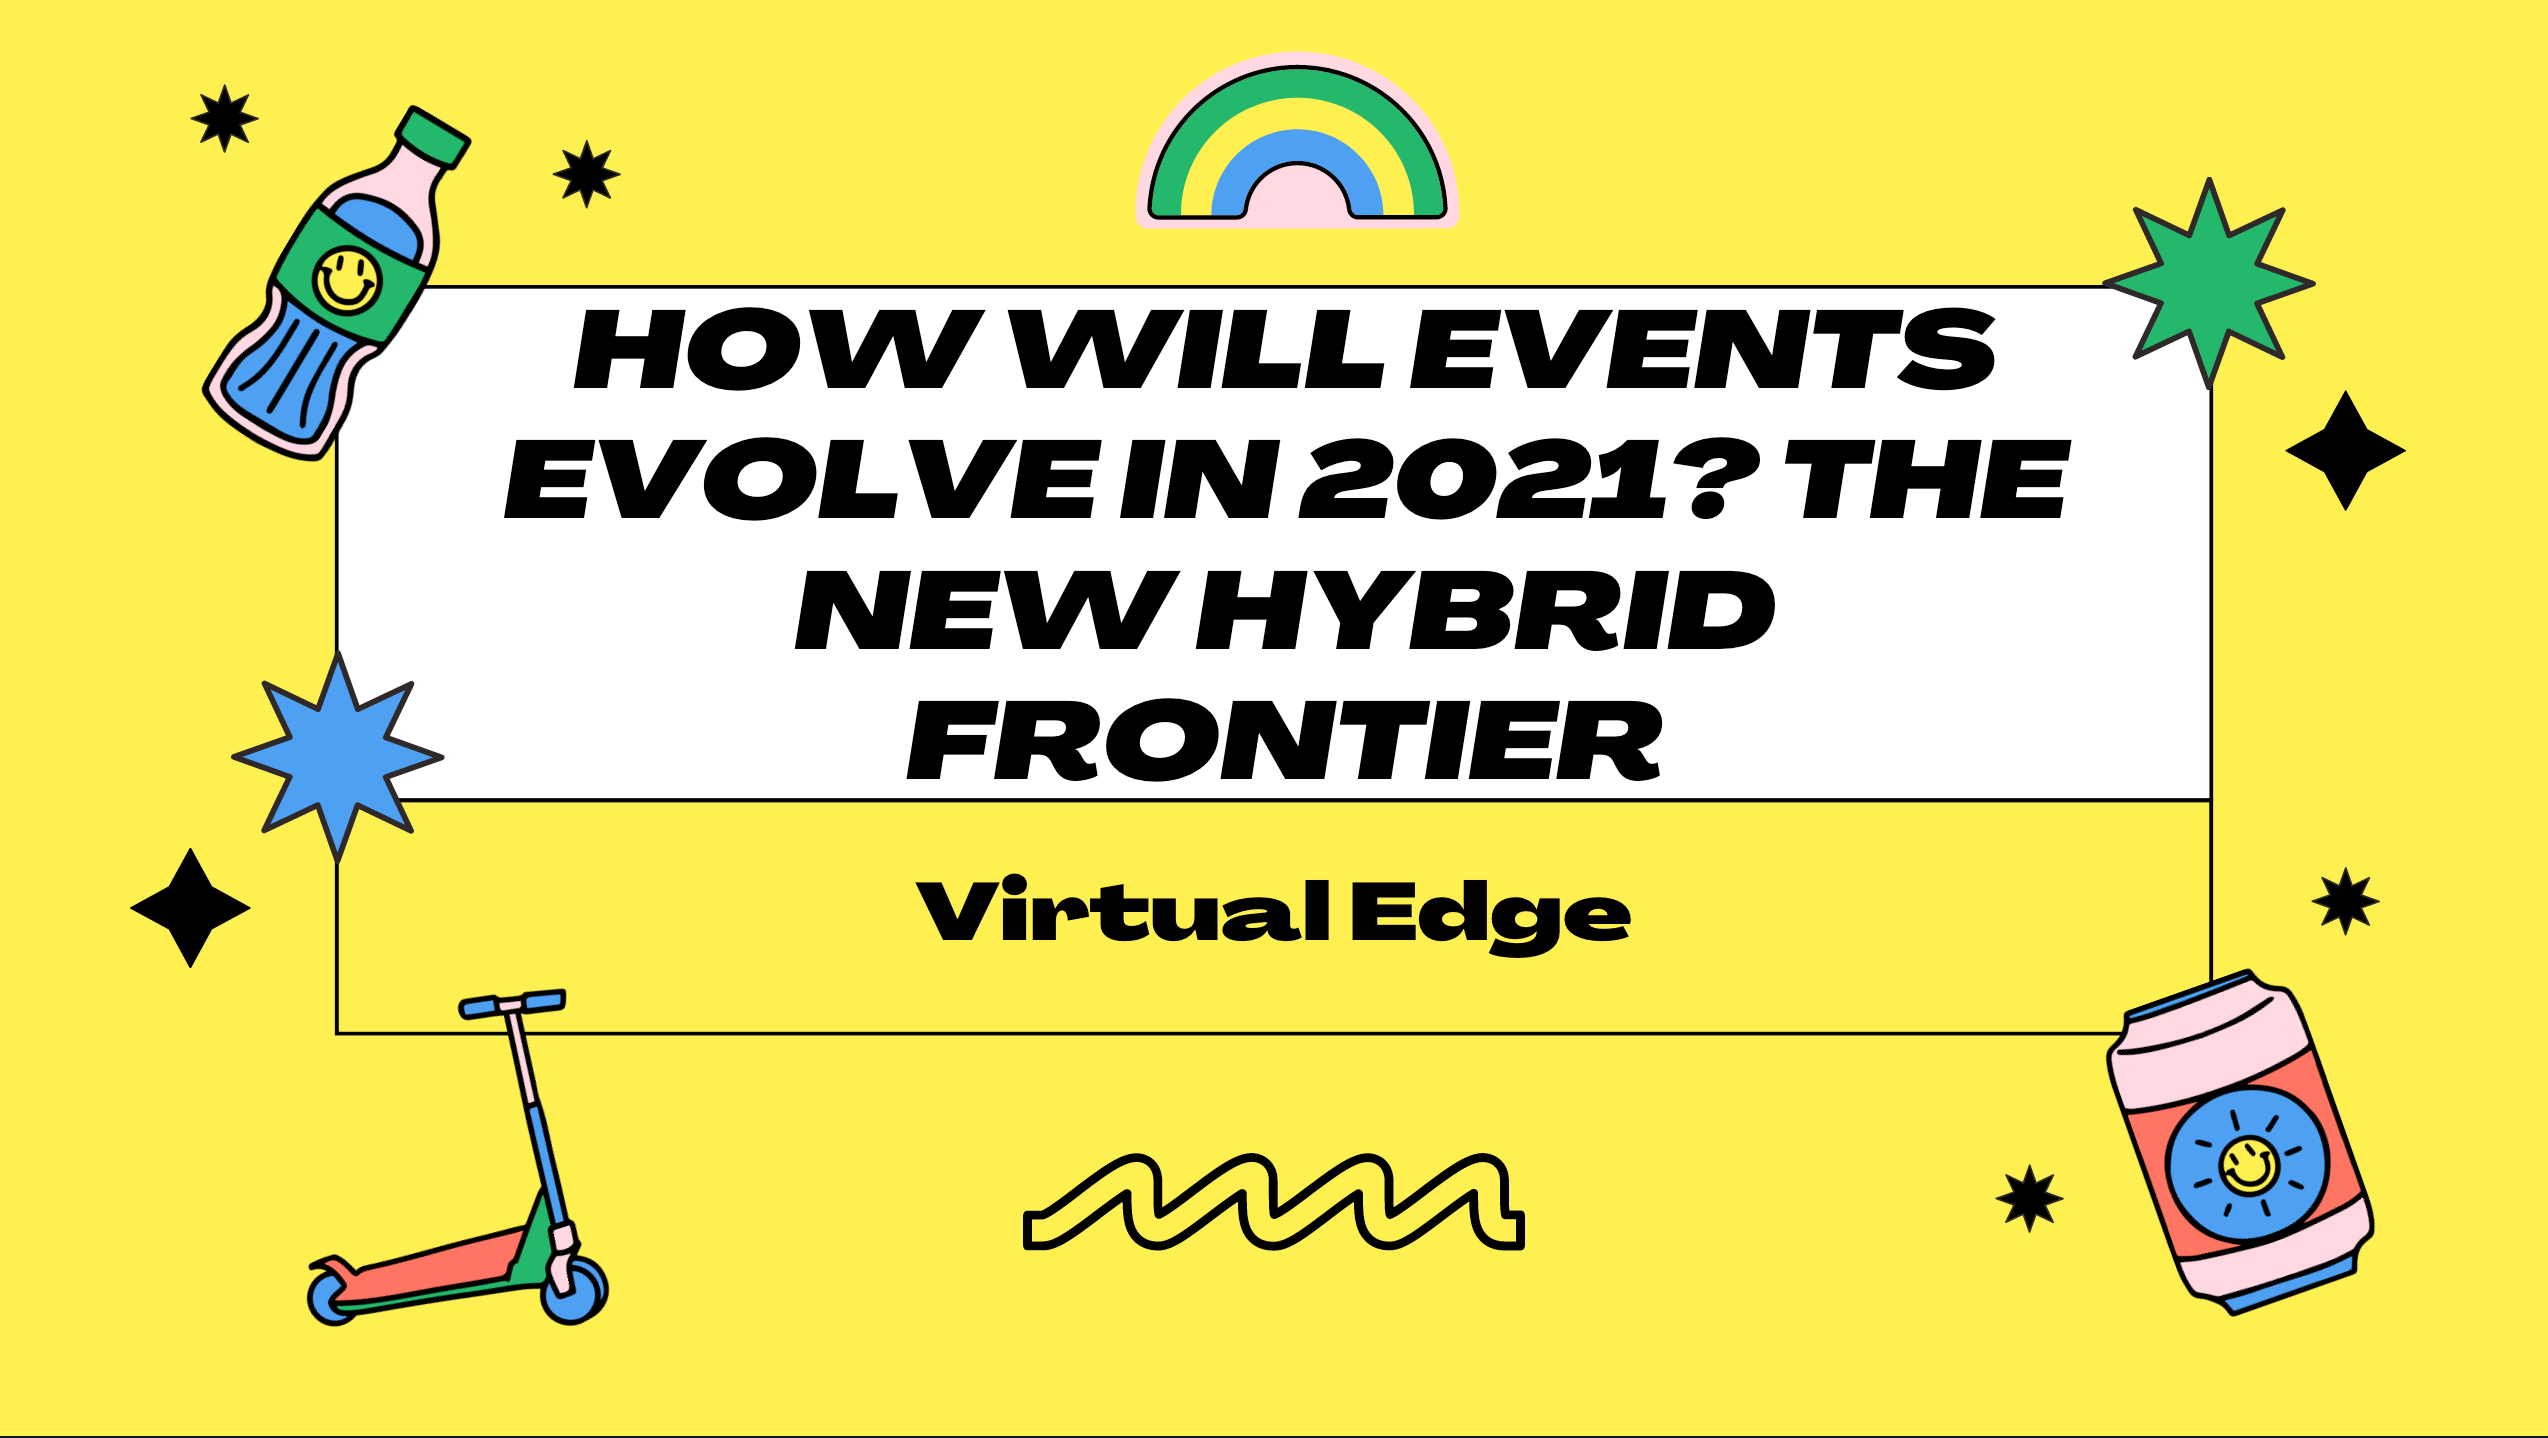 How Will Events Evolve in 2021? The New Hybrid Frontier